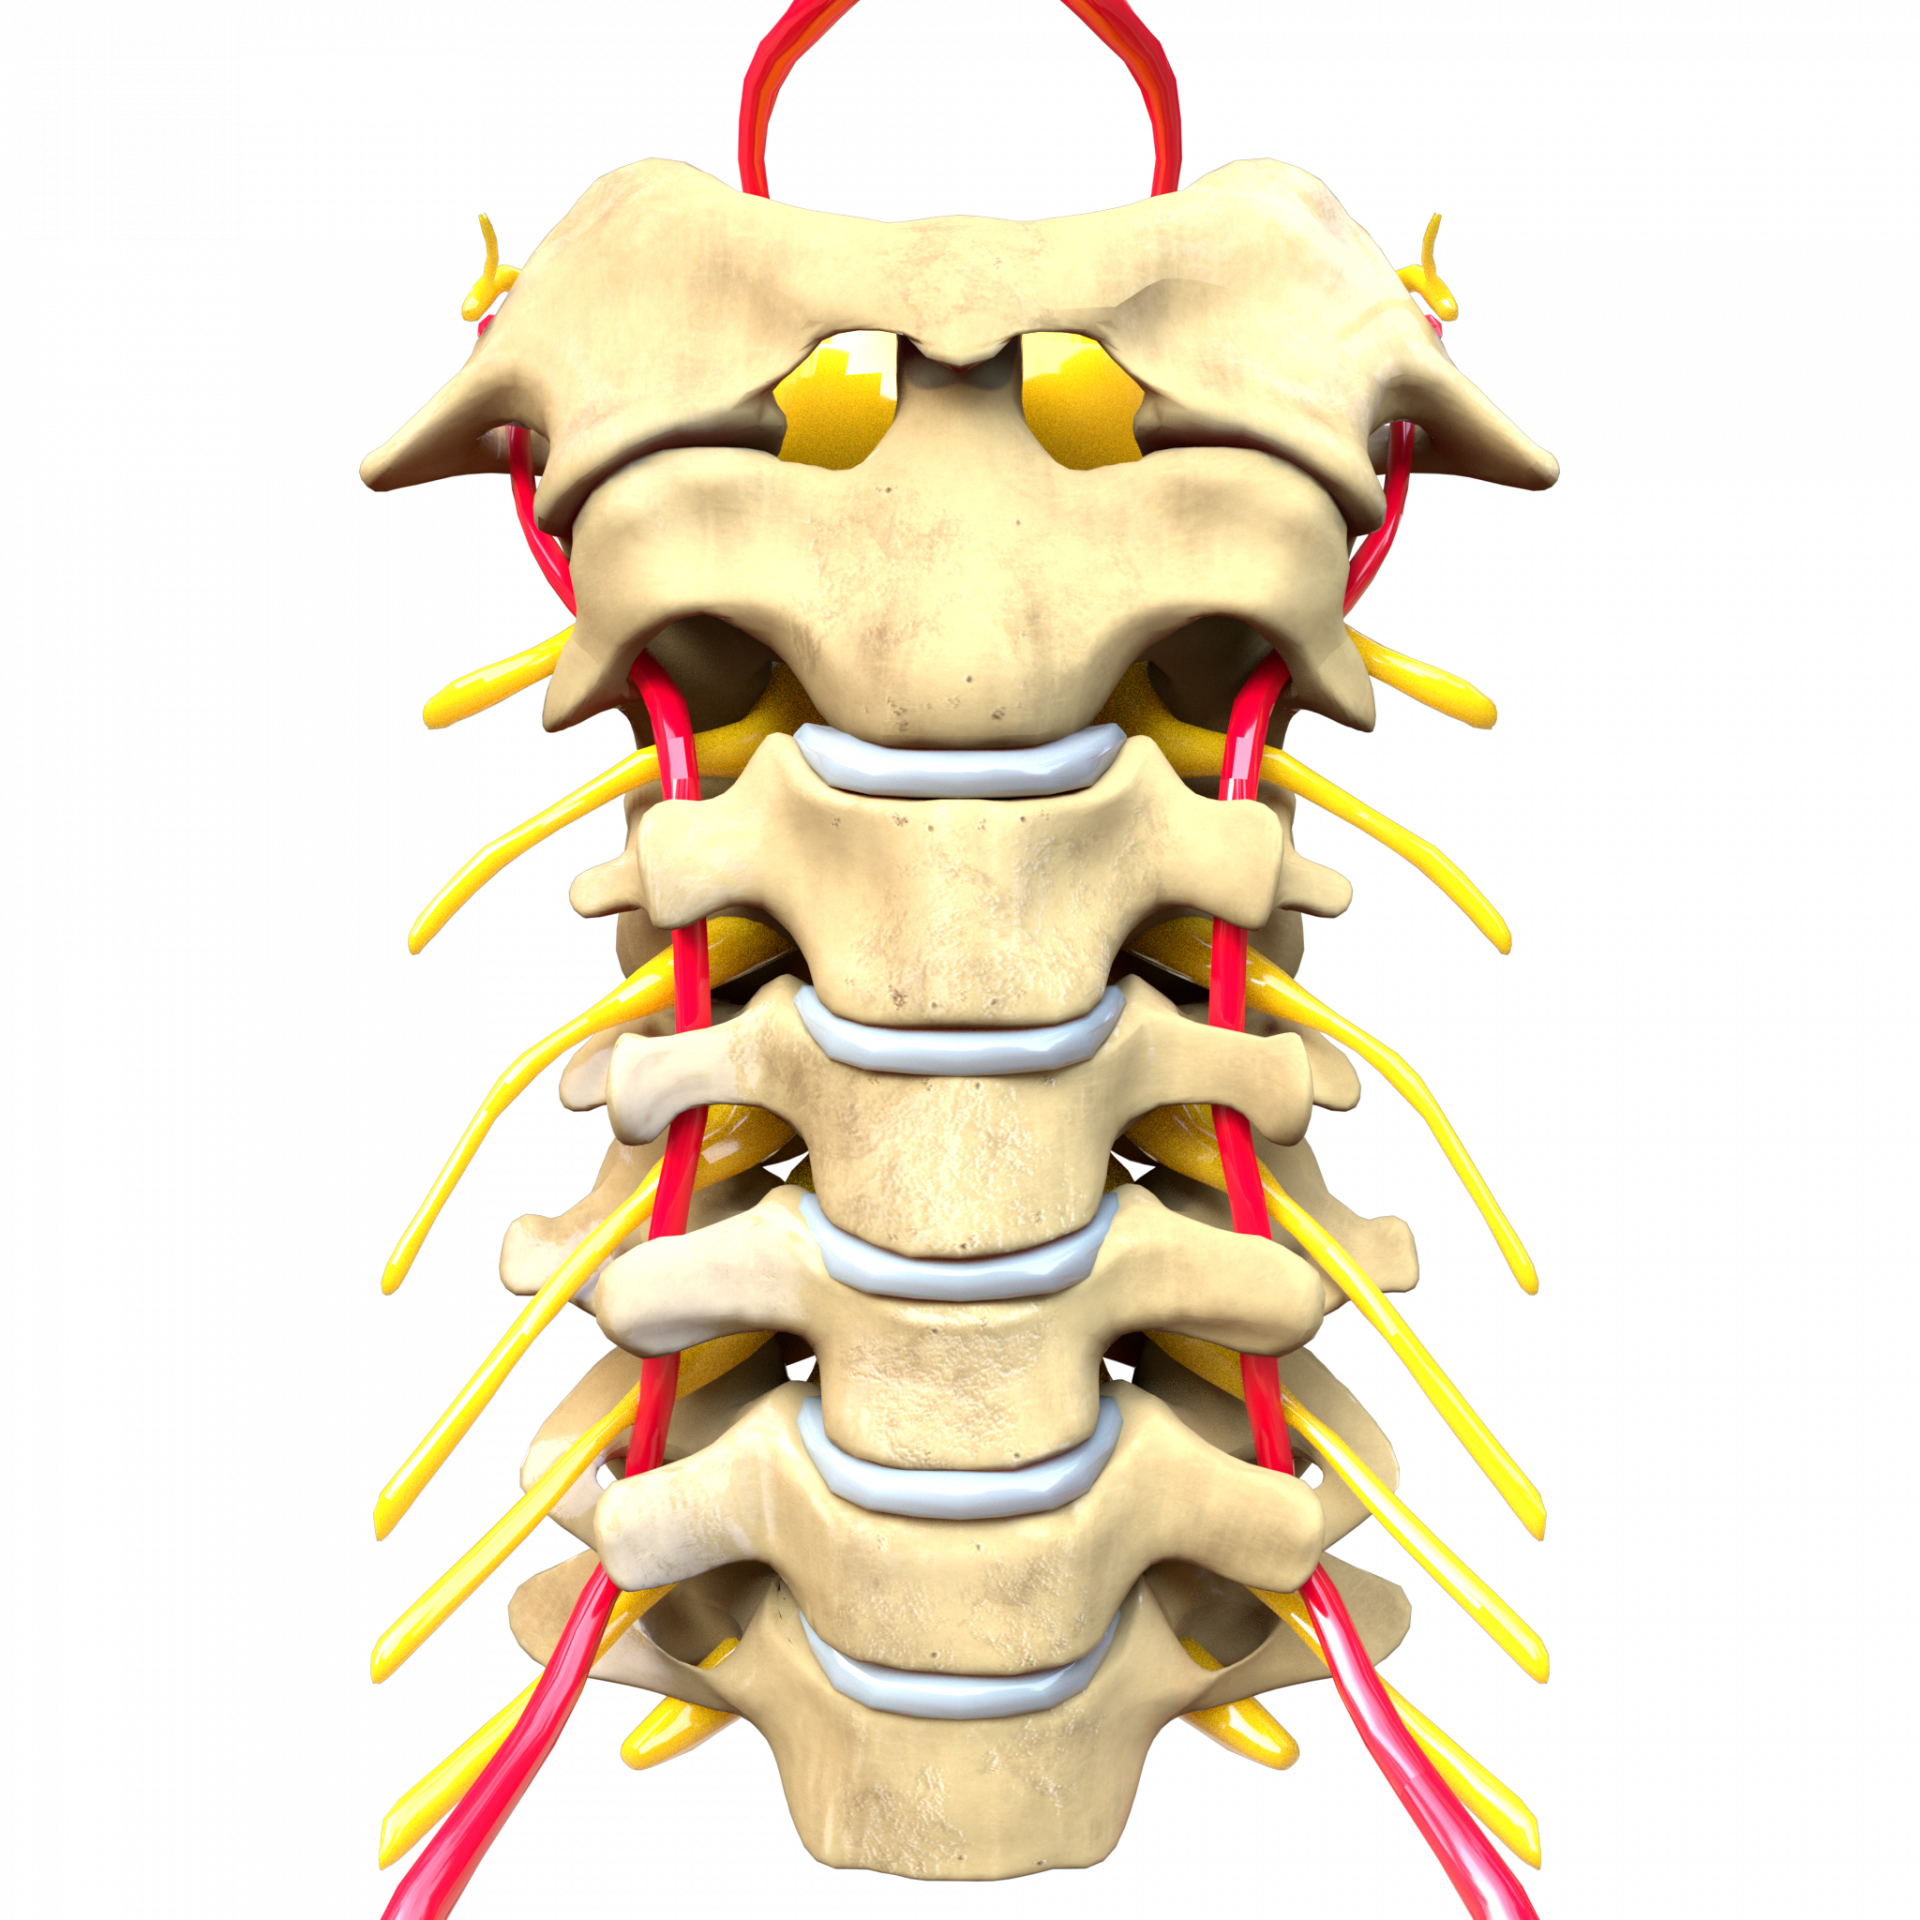 Cervical spine: Anatomy and 8 possible pathologies (When to worry?)